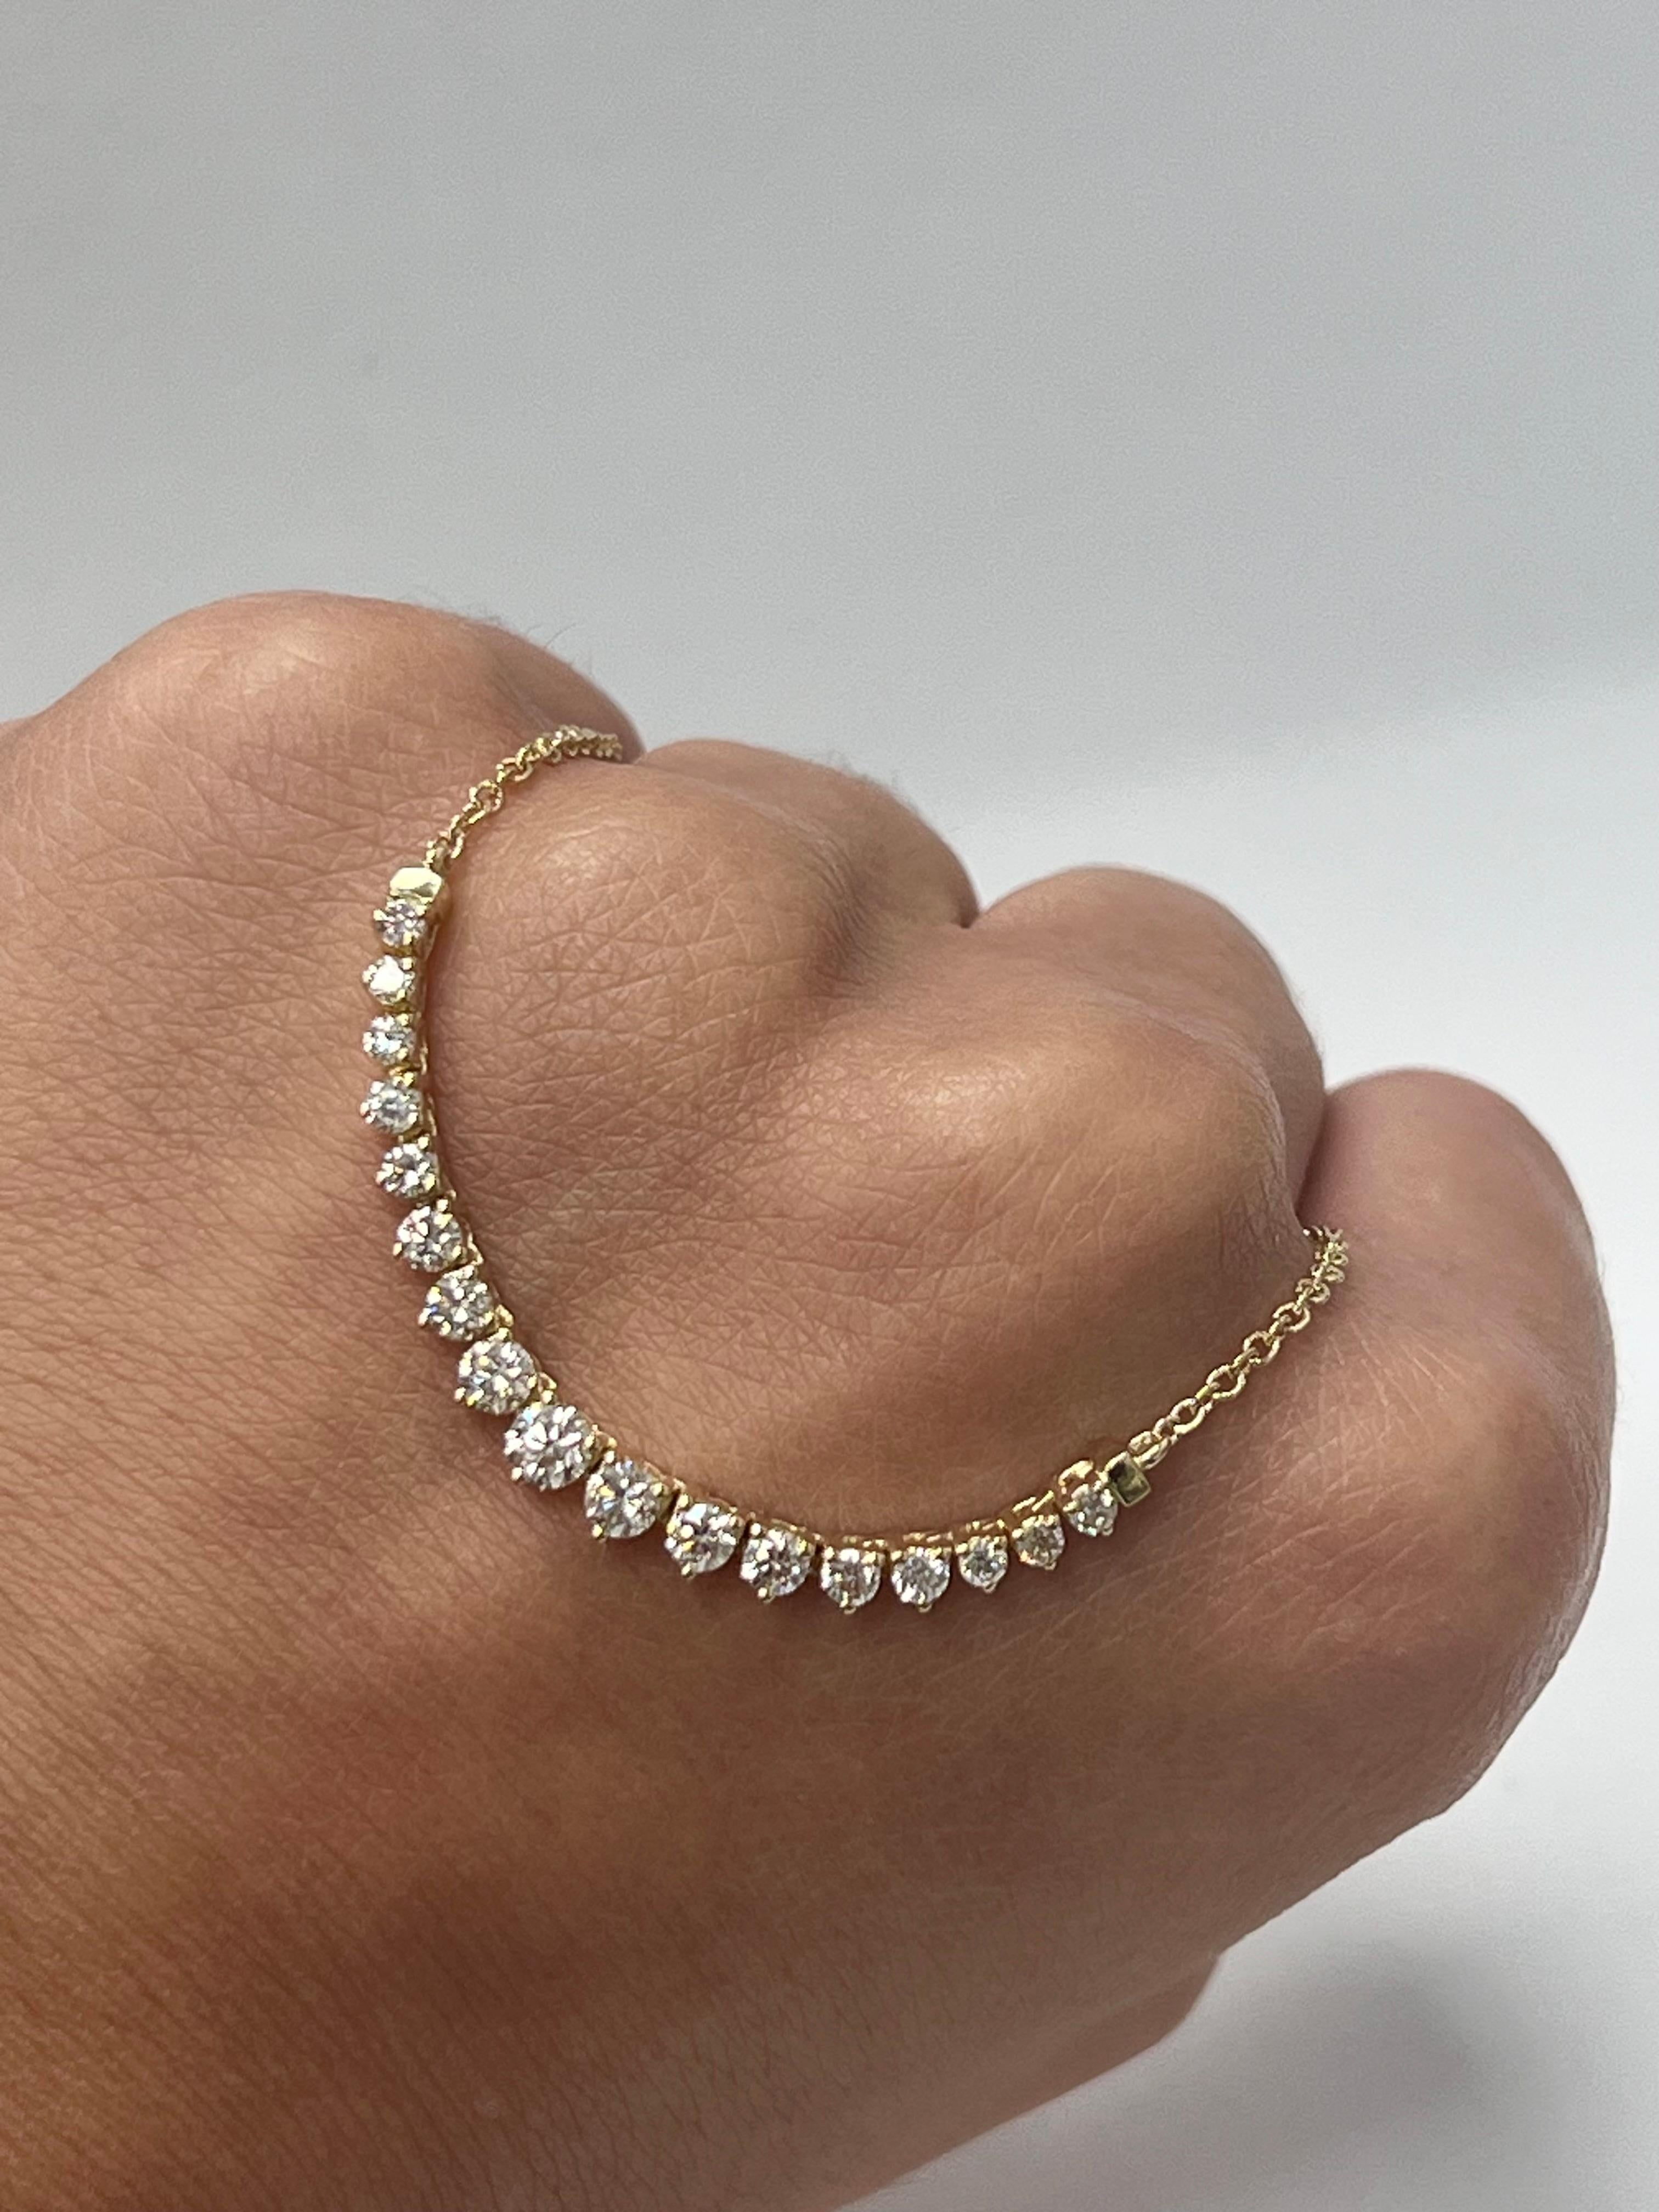 With this exquisite single-row yellow gold diamond necklace, style and glamour are in the spotlight. This 14-karat necklace is made from a total of 17 round diamonds totaling 1.15 carats, all in SI1-SI2, GH color. This classic look is timeless and